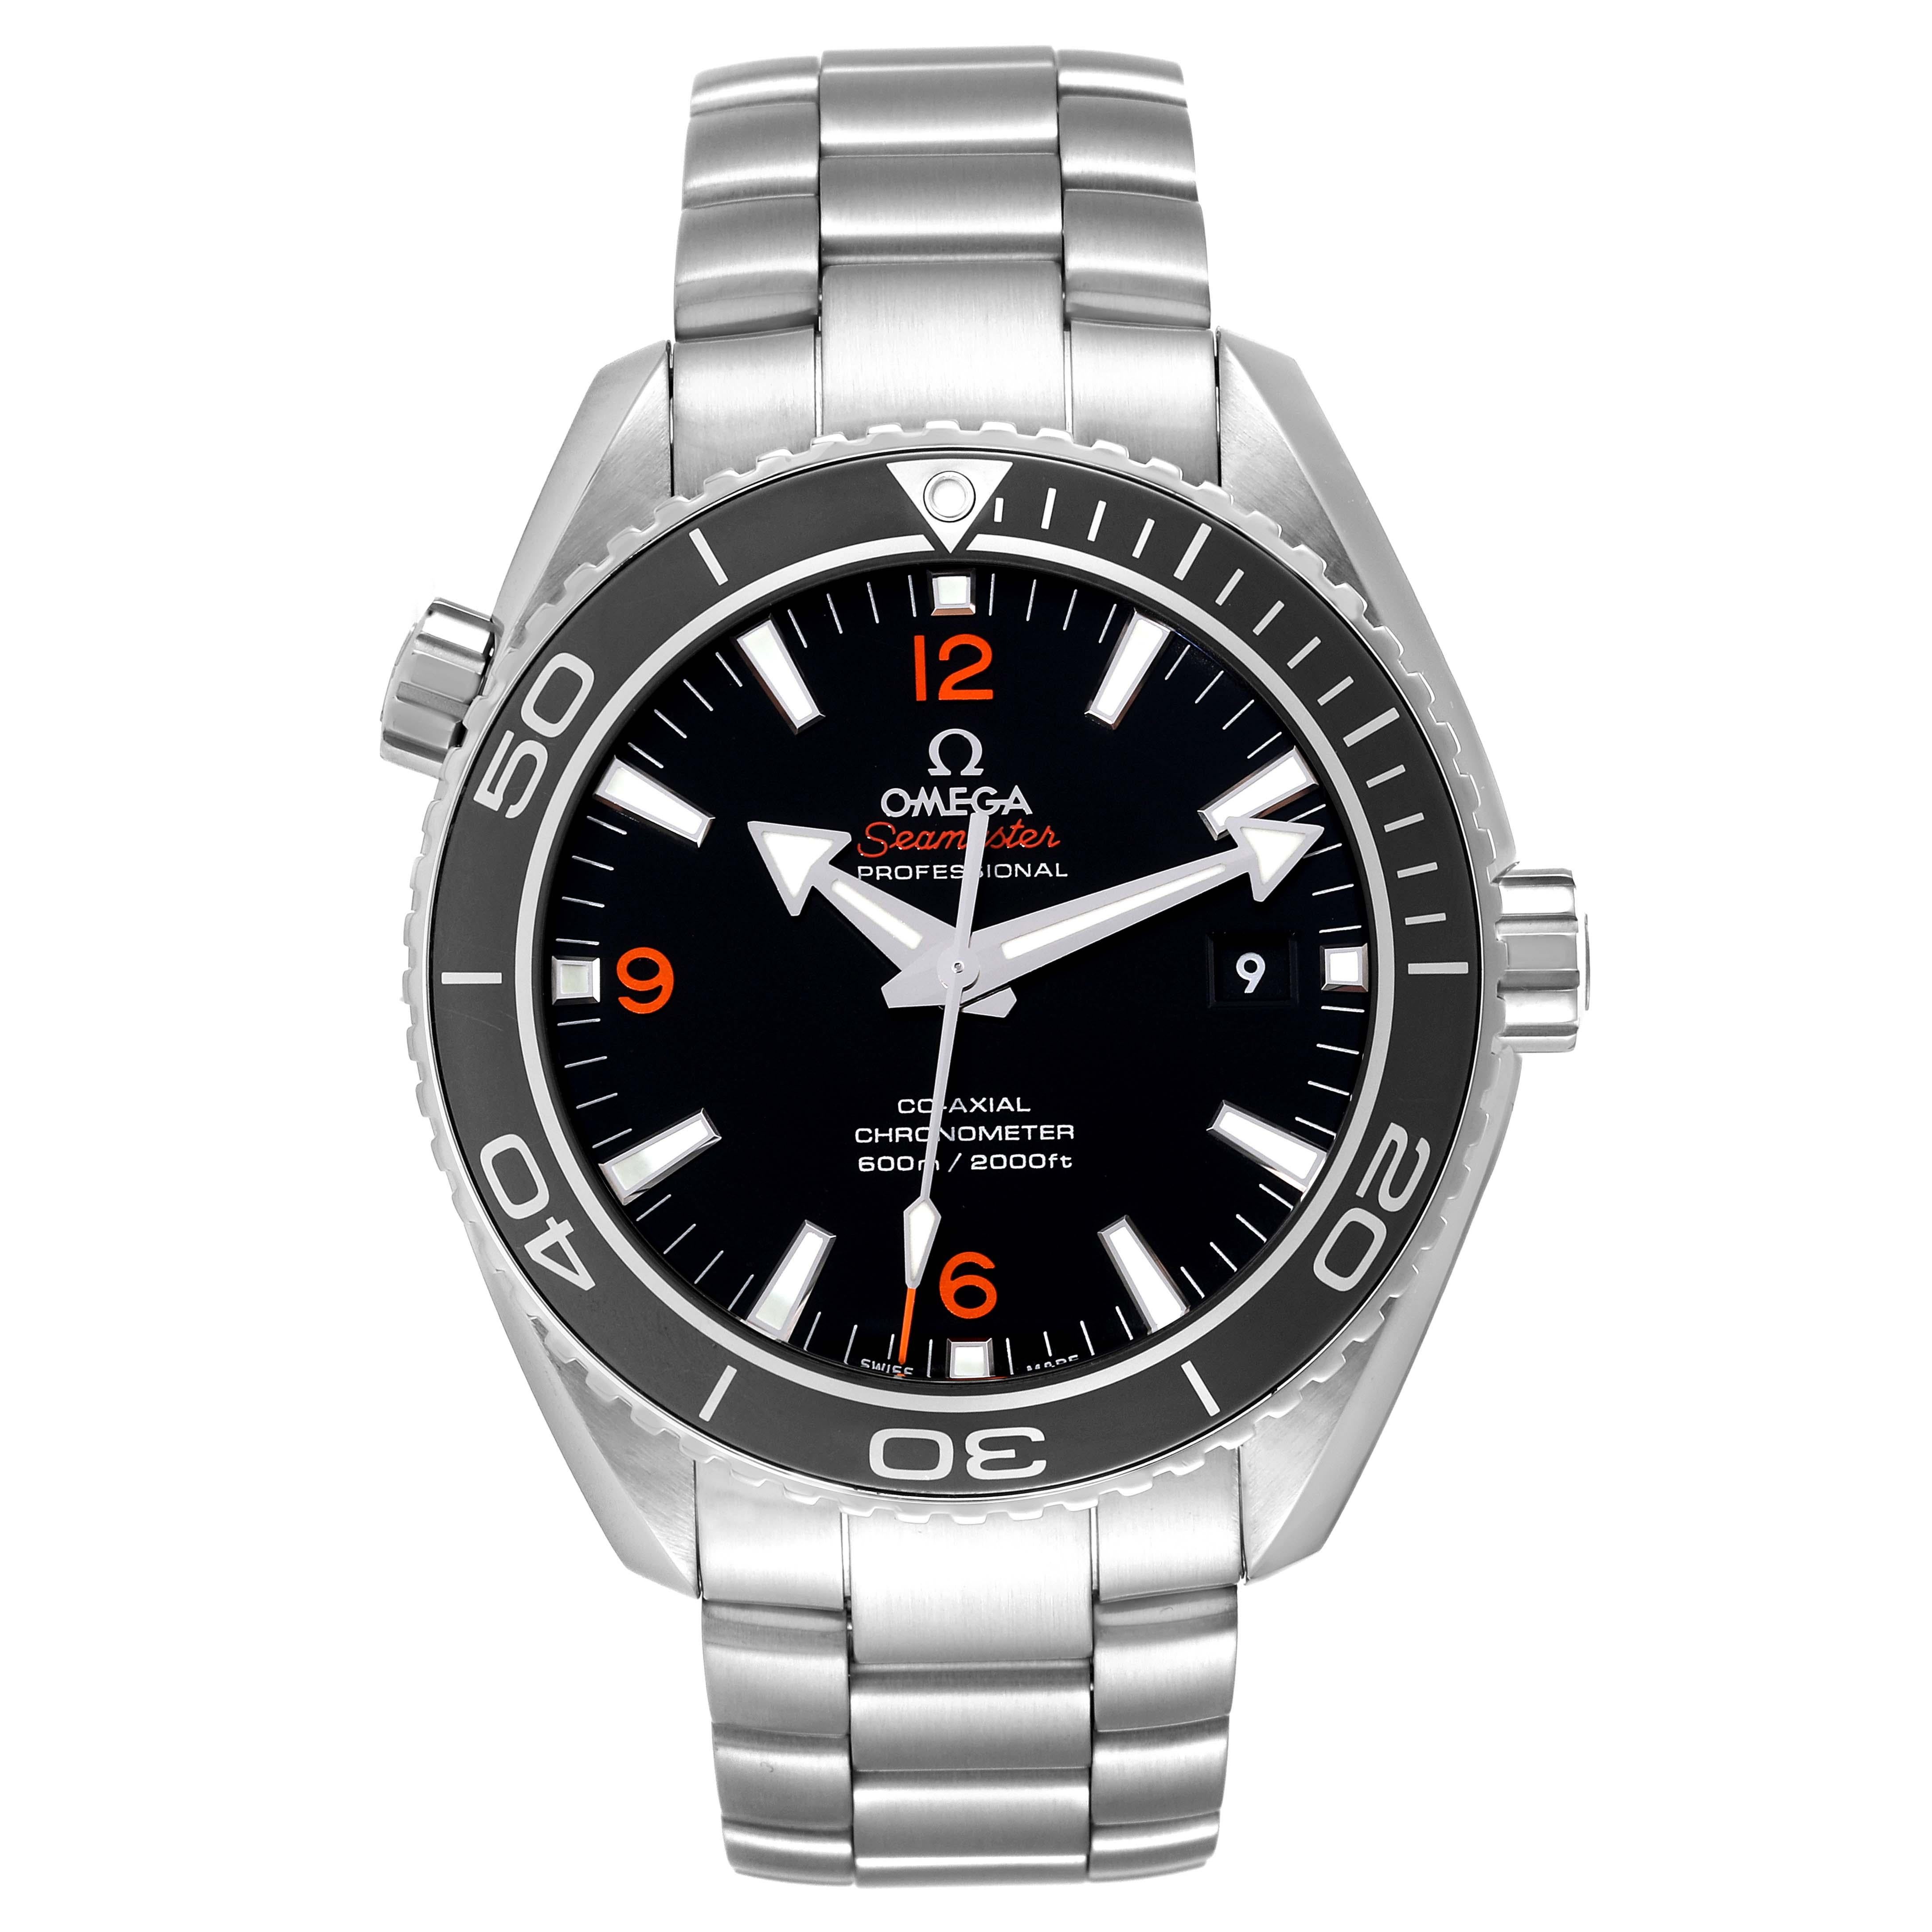 Omega Seamaster Planet Ocean Black Dial Steel Watch 232.30.46.21.01.003 Card. Automatic self-winding chronograph movement with column wheel mechanism and Co-Axial Escapement for greater precision, stability and durability of the movement. Silicon